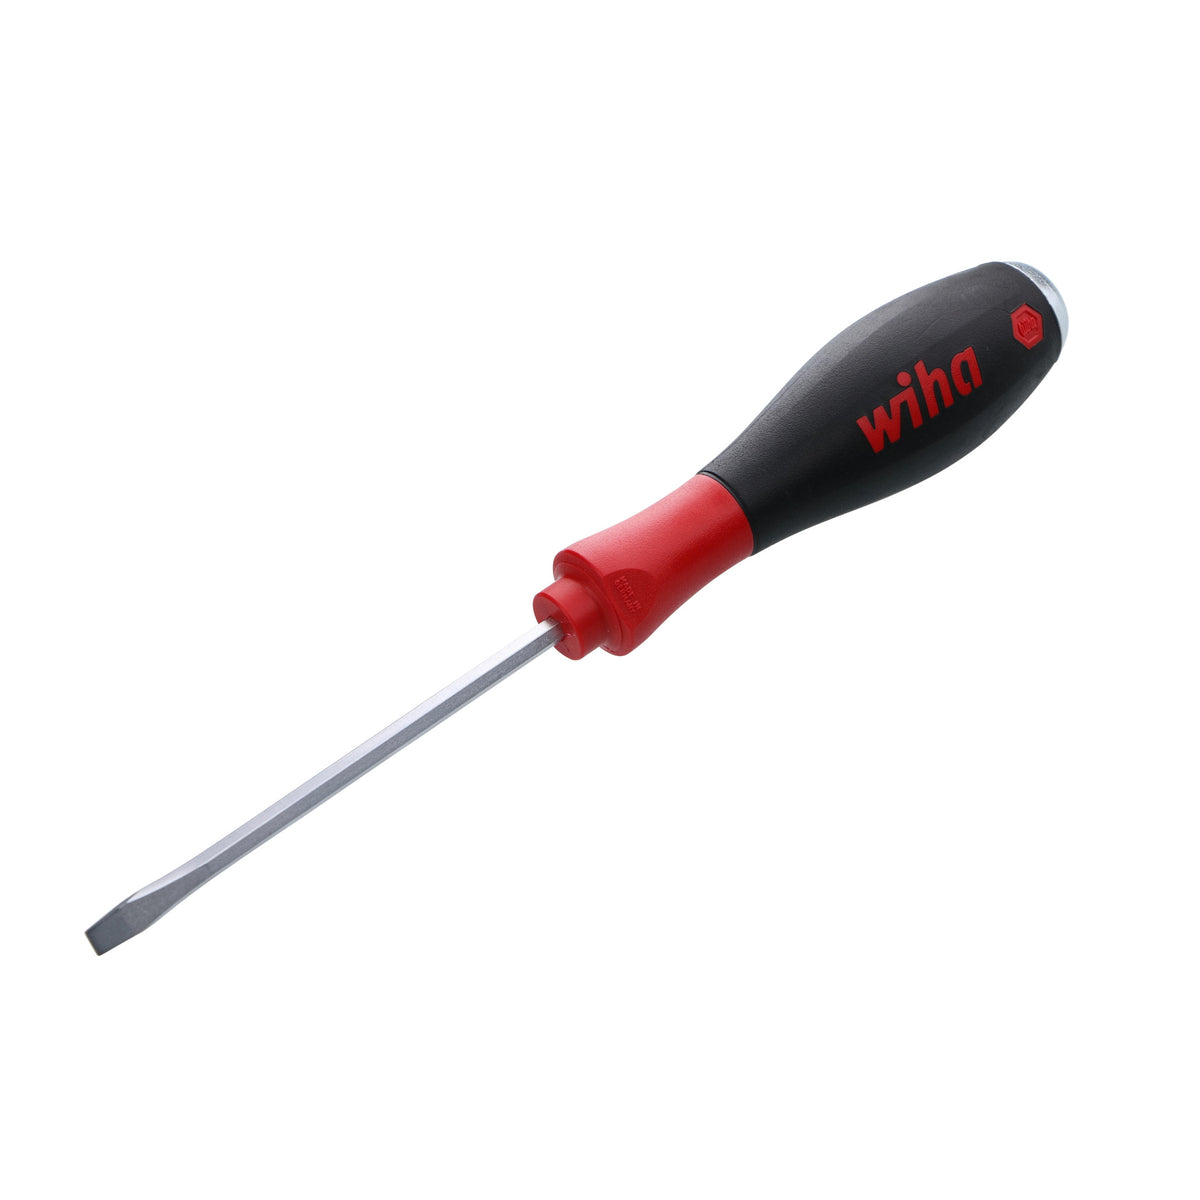 Heavy Duty SoftFinish Slotted Screwdrivers